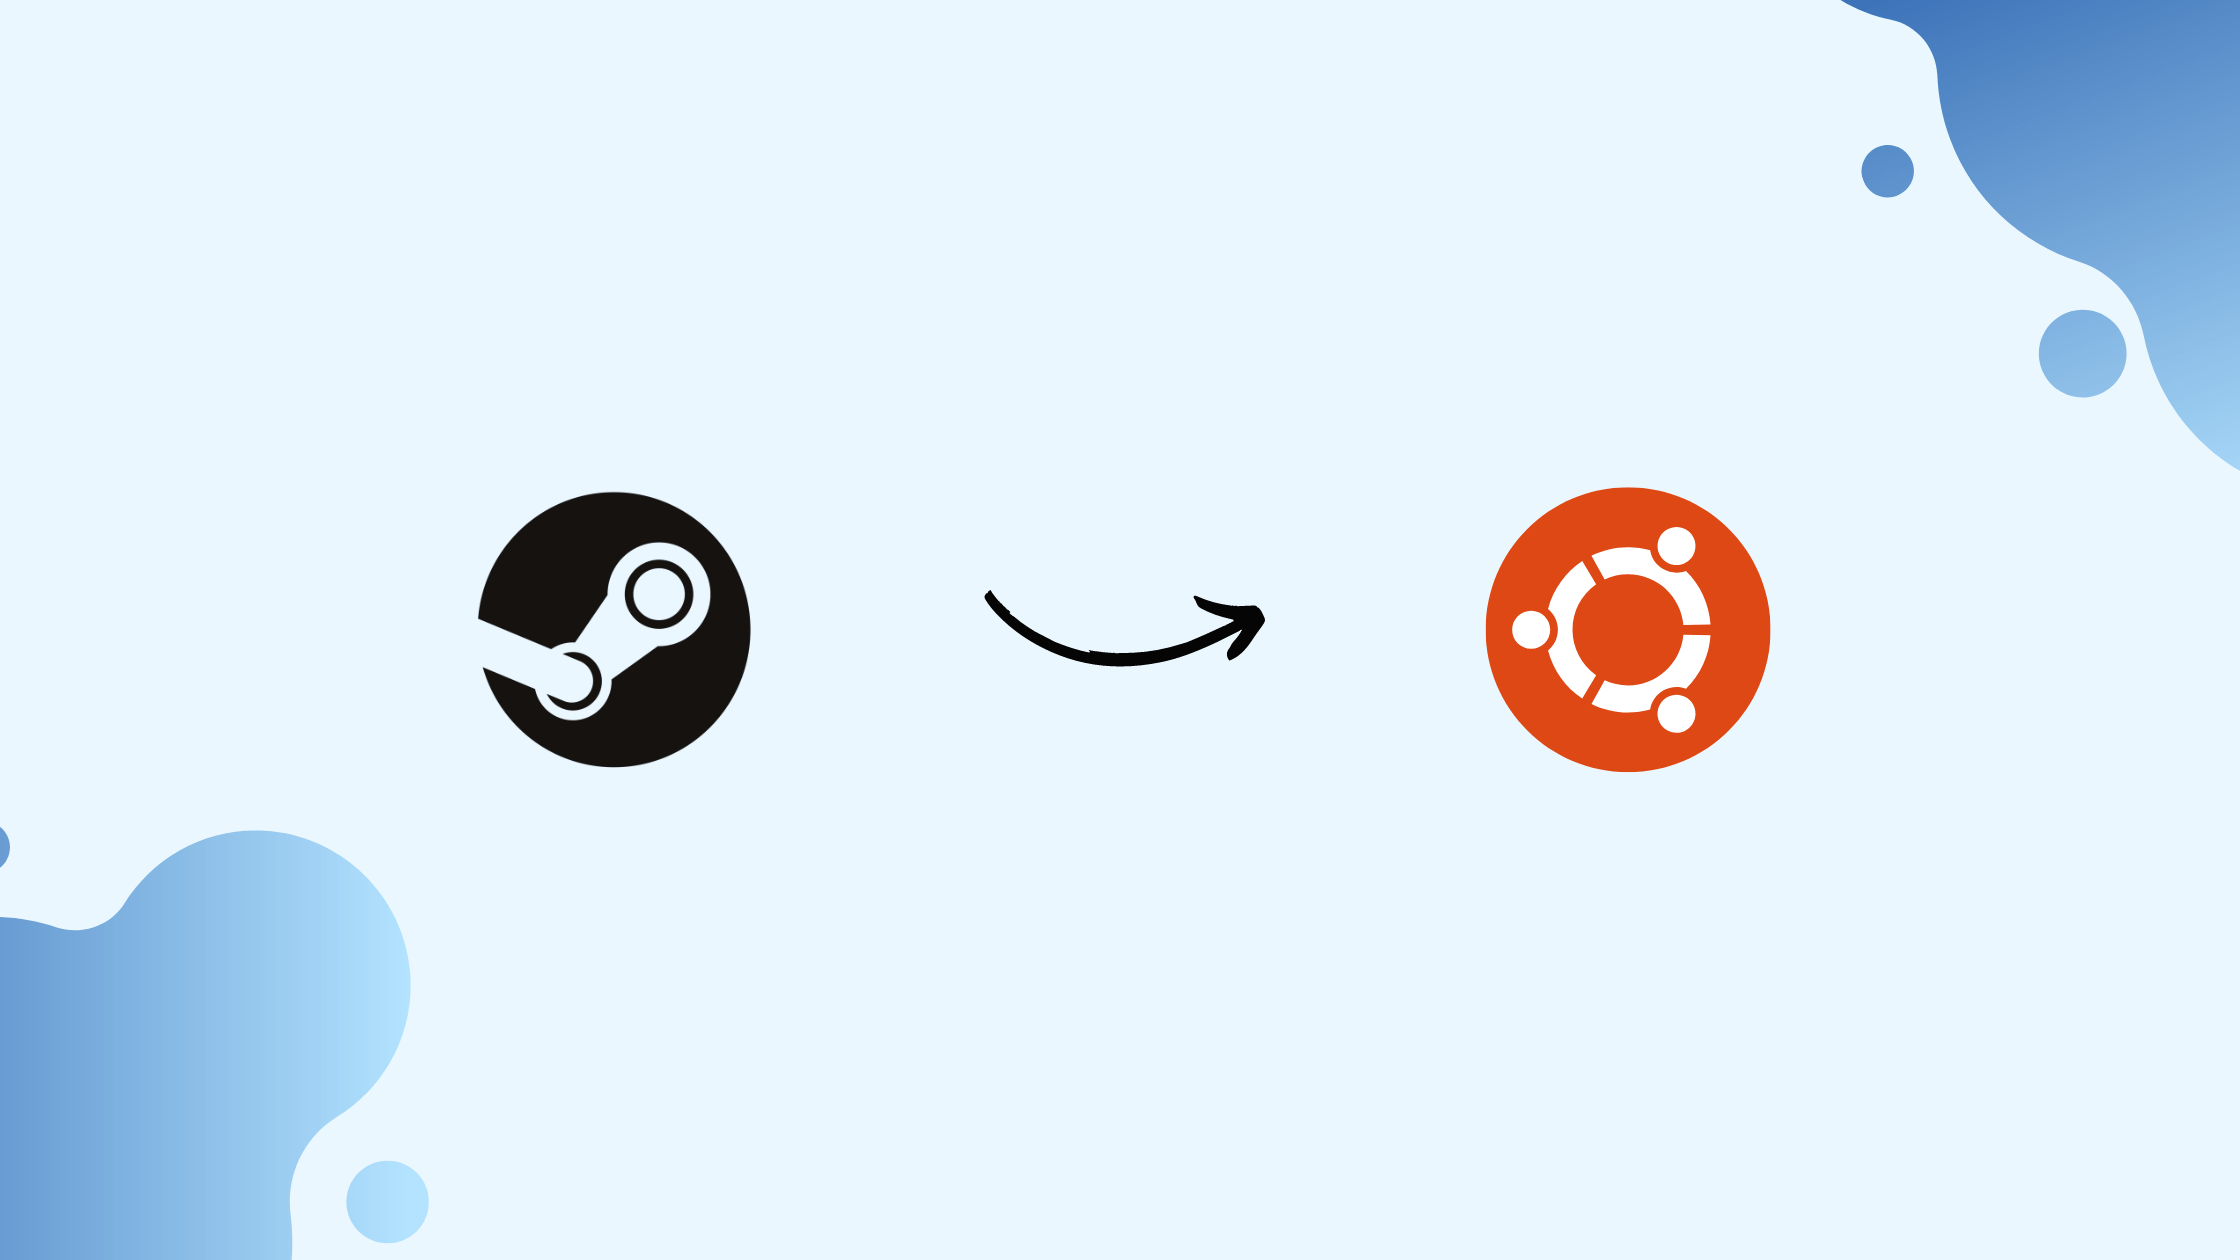 How to Install and Use Steam on Ubuntu Linux